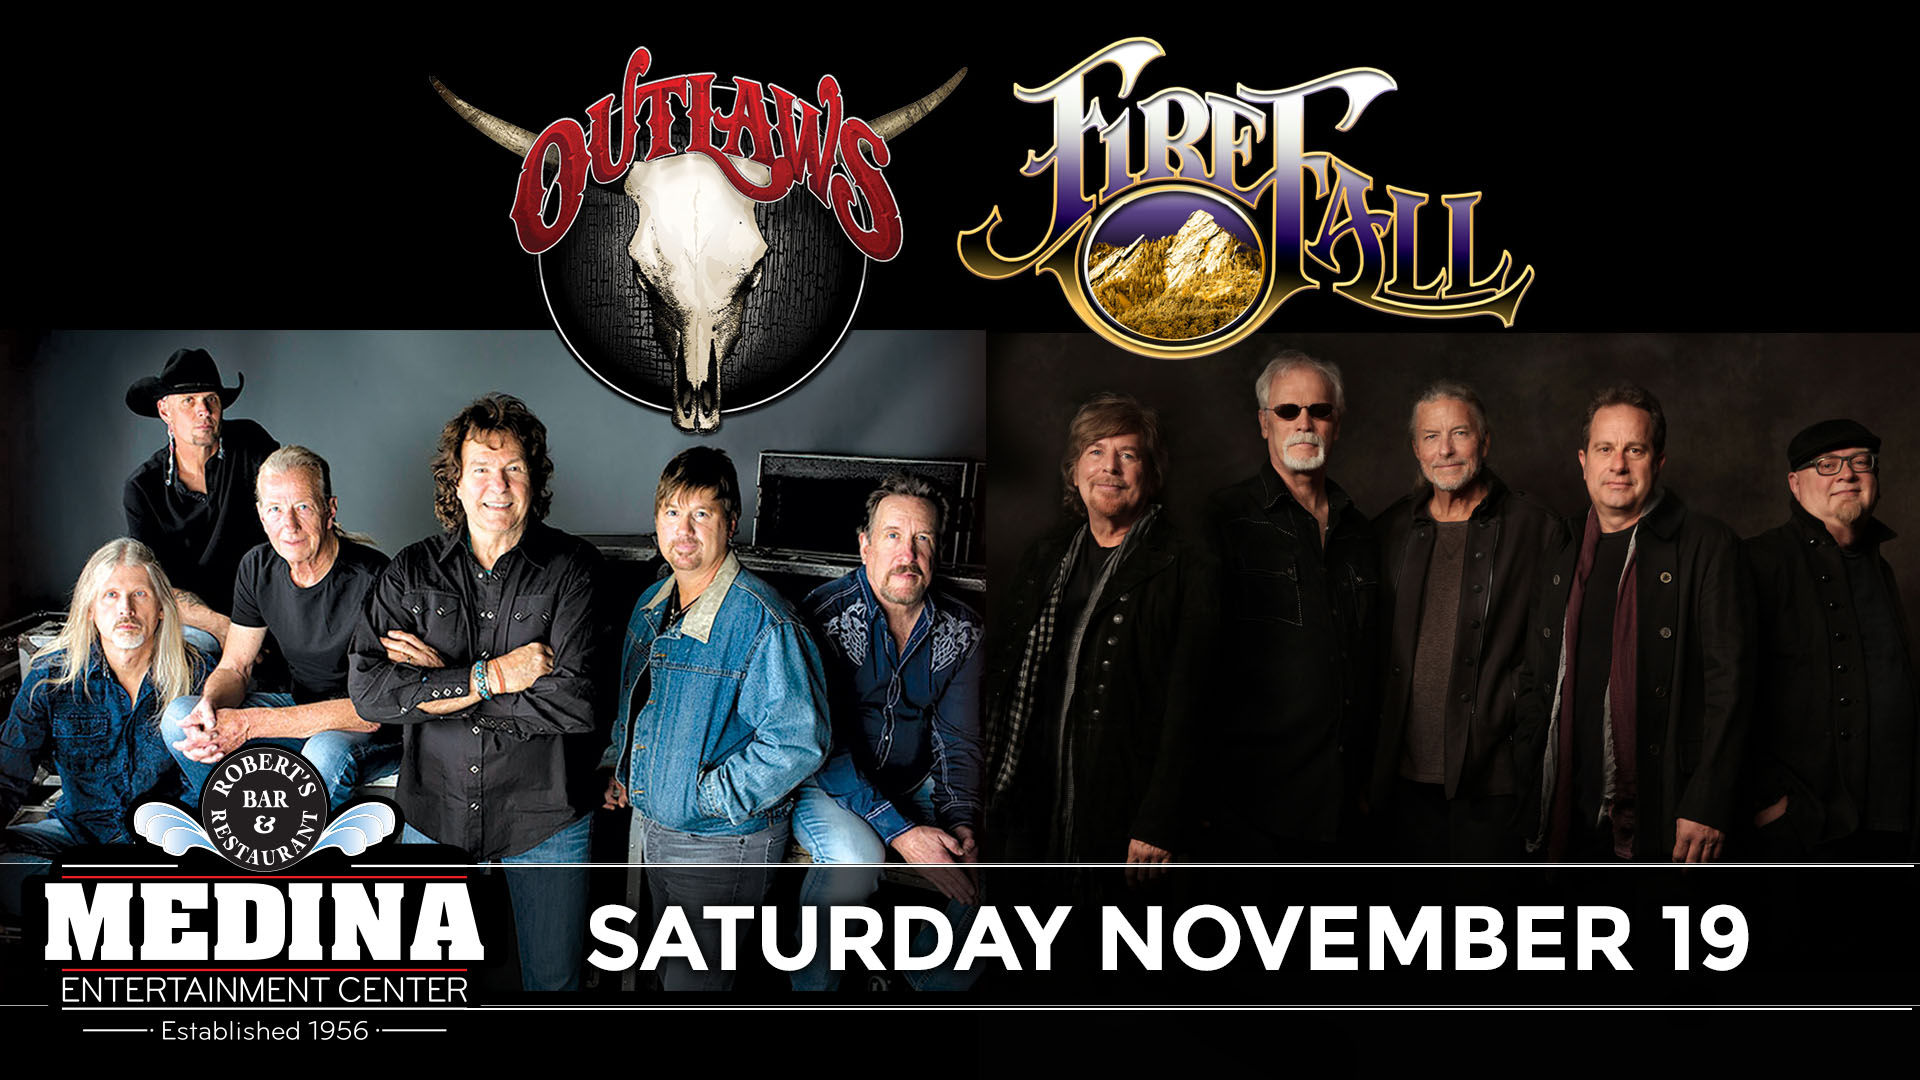 The Outlaws / Firefall Medina Entertainment Center Saturday, November 19th, 2022 Doors: 7:30PM | Music: 8:00PM | 21+ Tickets on-sale Friday, June 3rd at 11AM General Seating $37 / Silver Reserved $44 / Gold Reserved $47 plus applicable fees